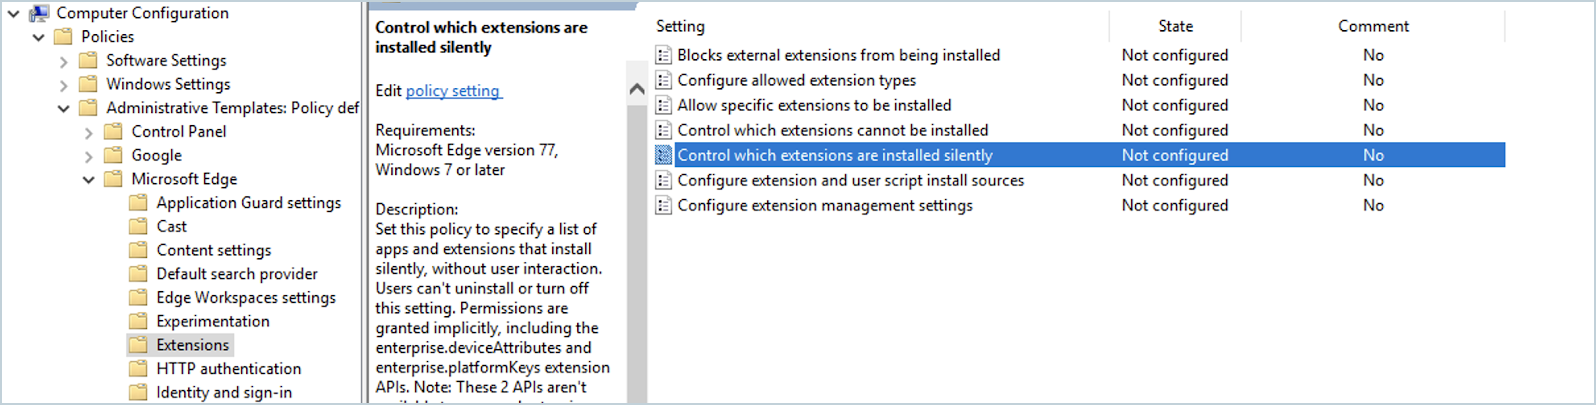 Control_which_extensions_are_displayed_silently.png